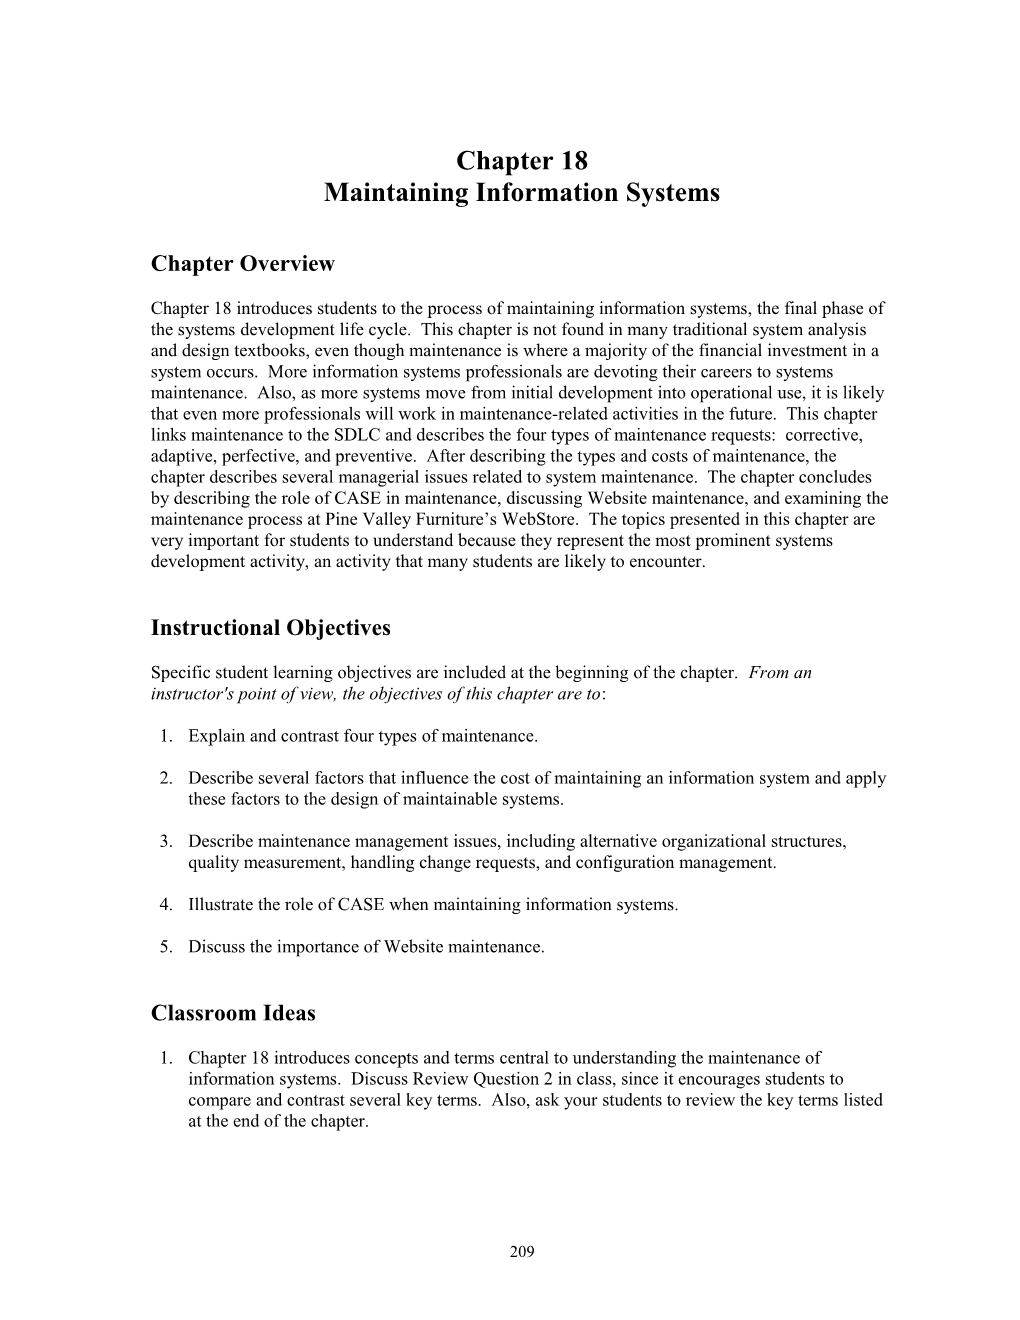 Chapter 21 Maintaining Information Systems